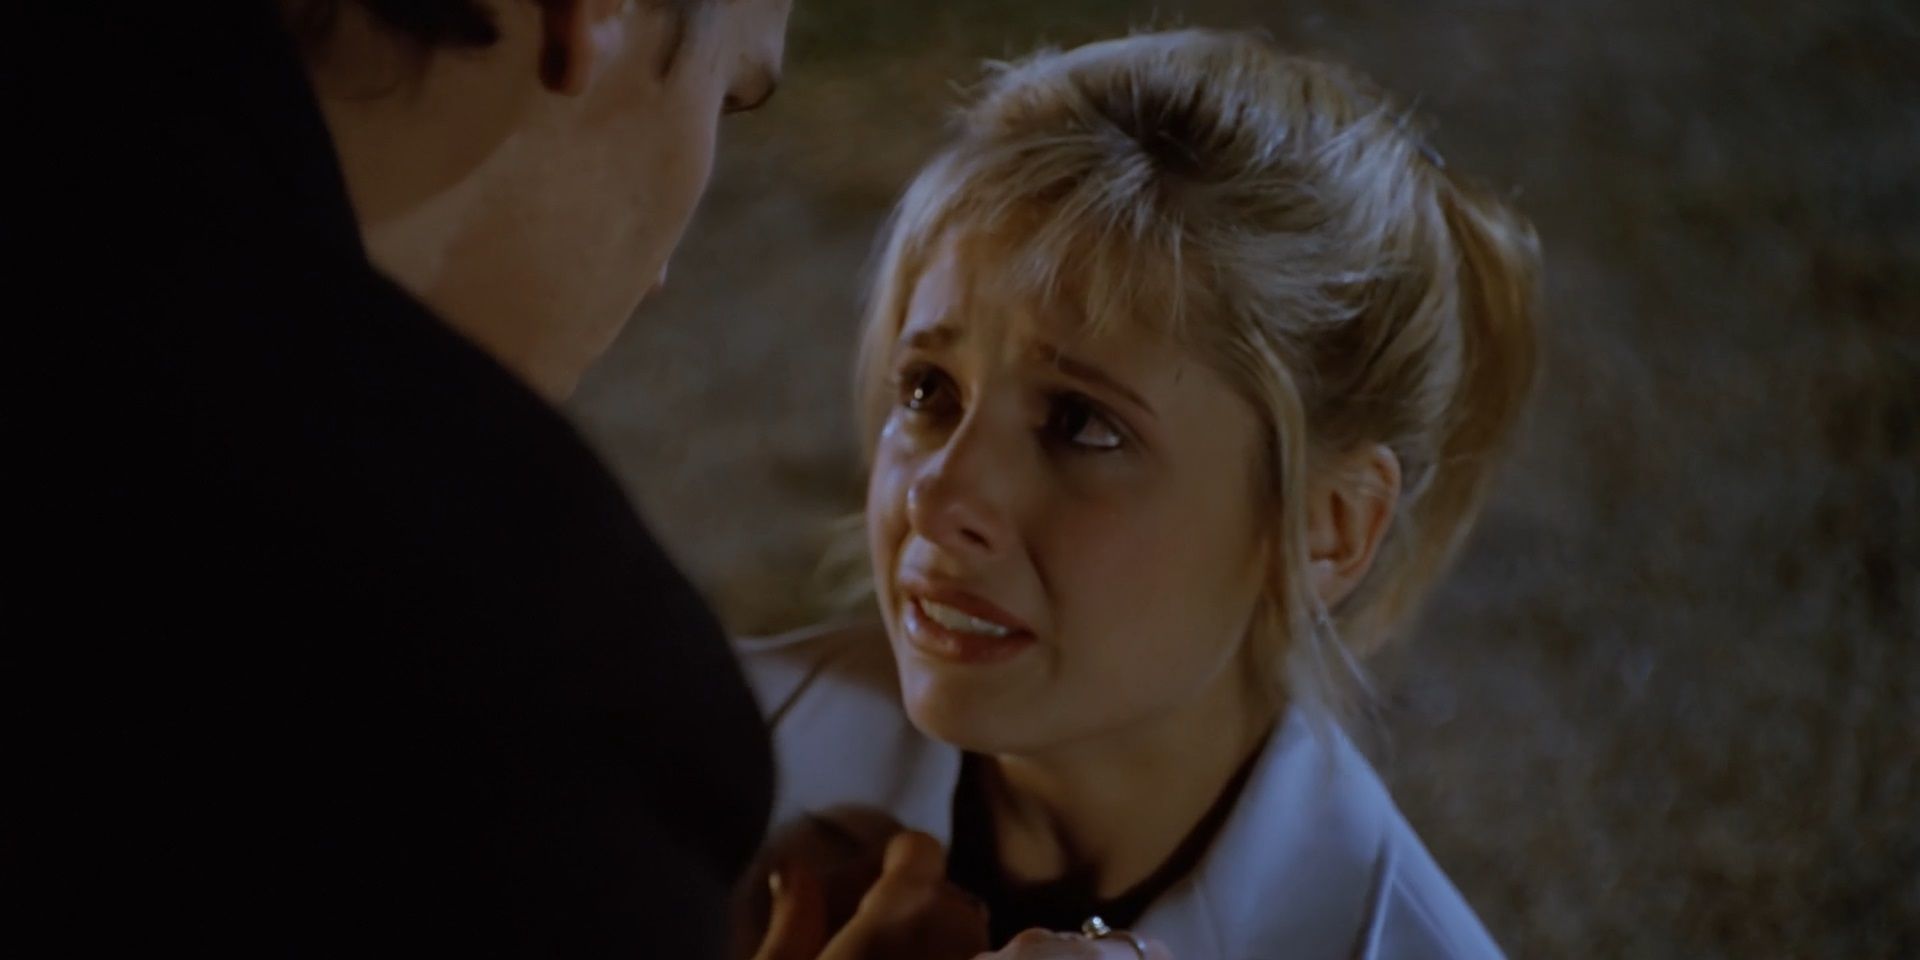 Buffy and Angel in the episode "Amends".